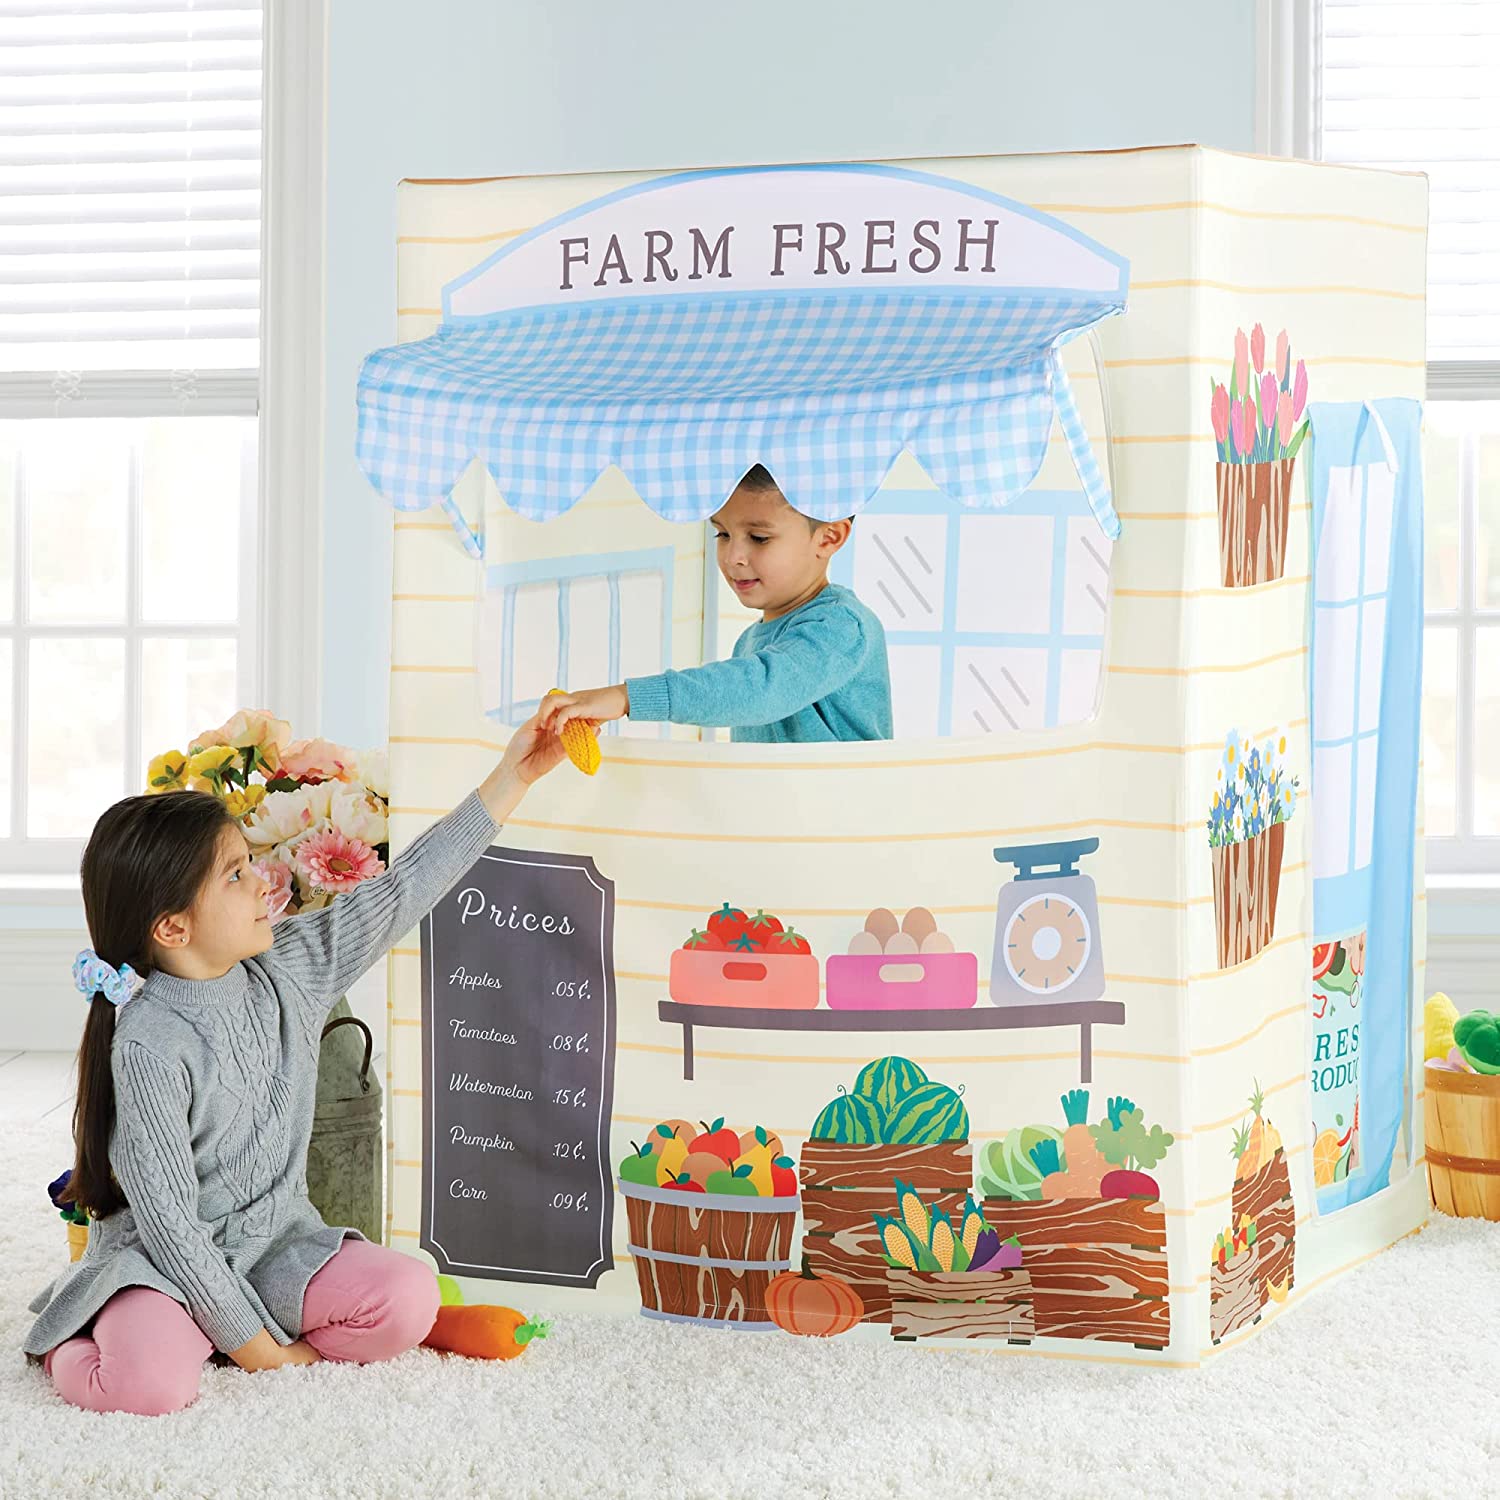 Martha Stewart Kids’ Farmer’s Market Play Tent – Large Indoor Playhouse for Pretend Play in Classroom or Home